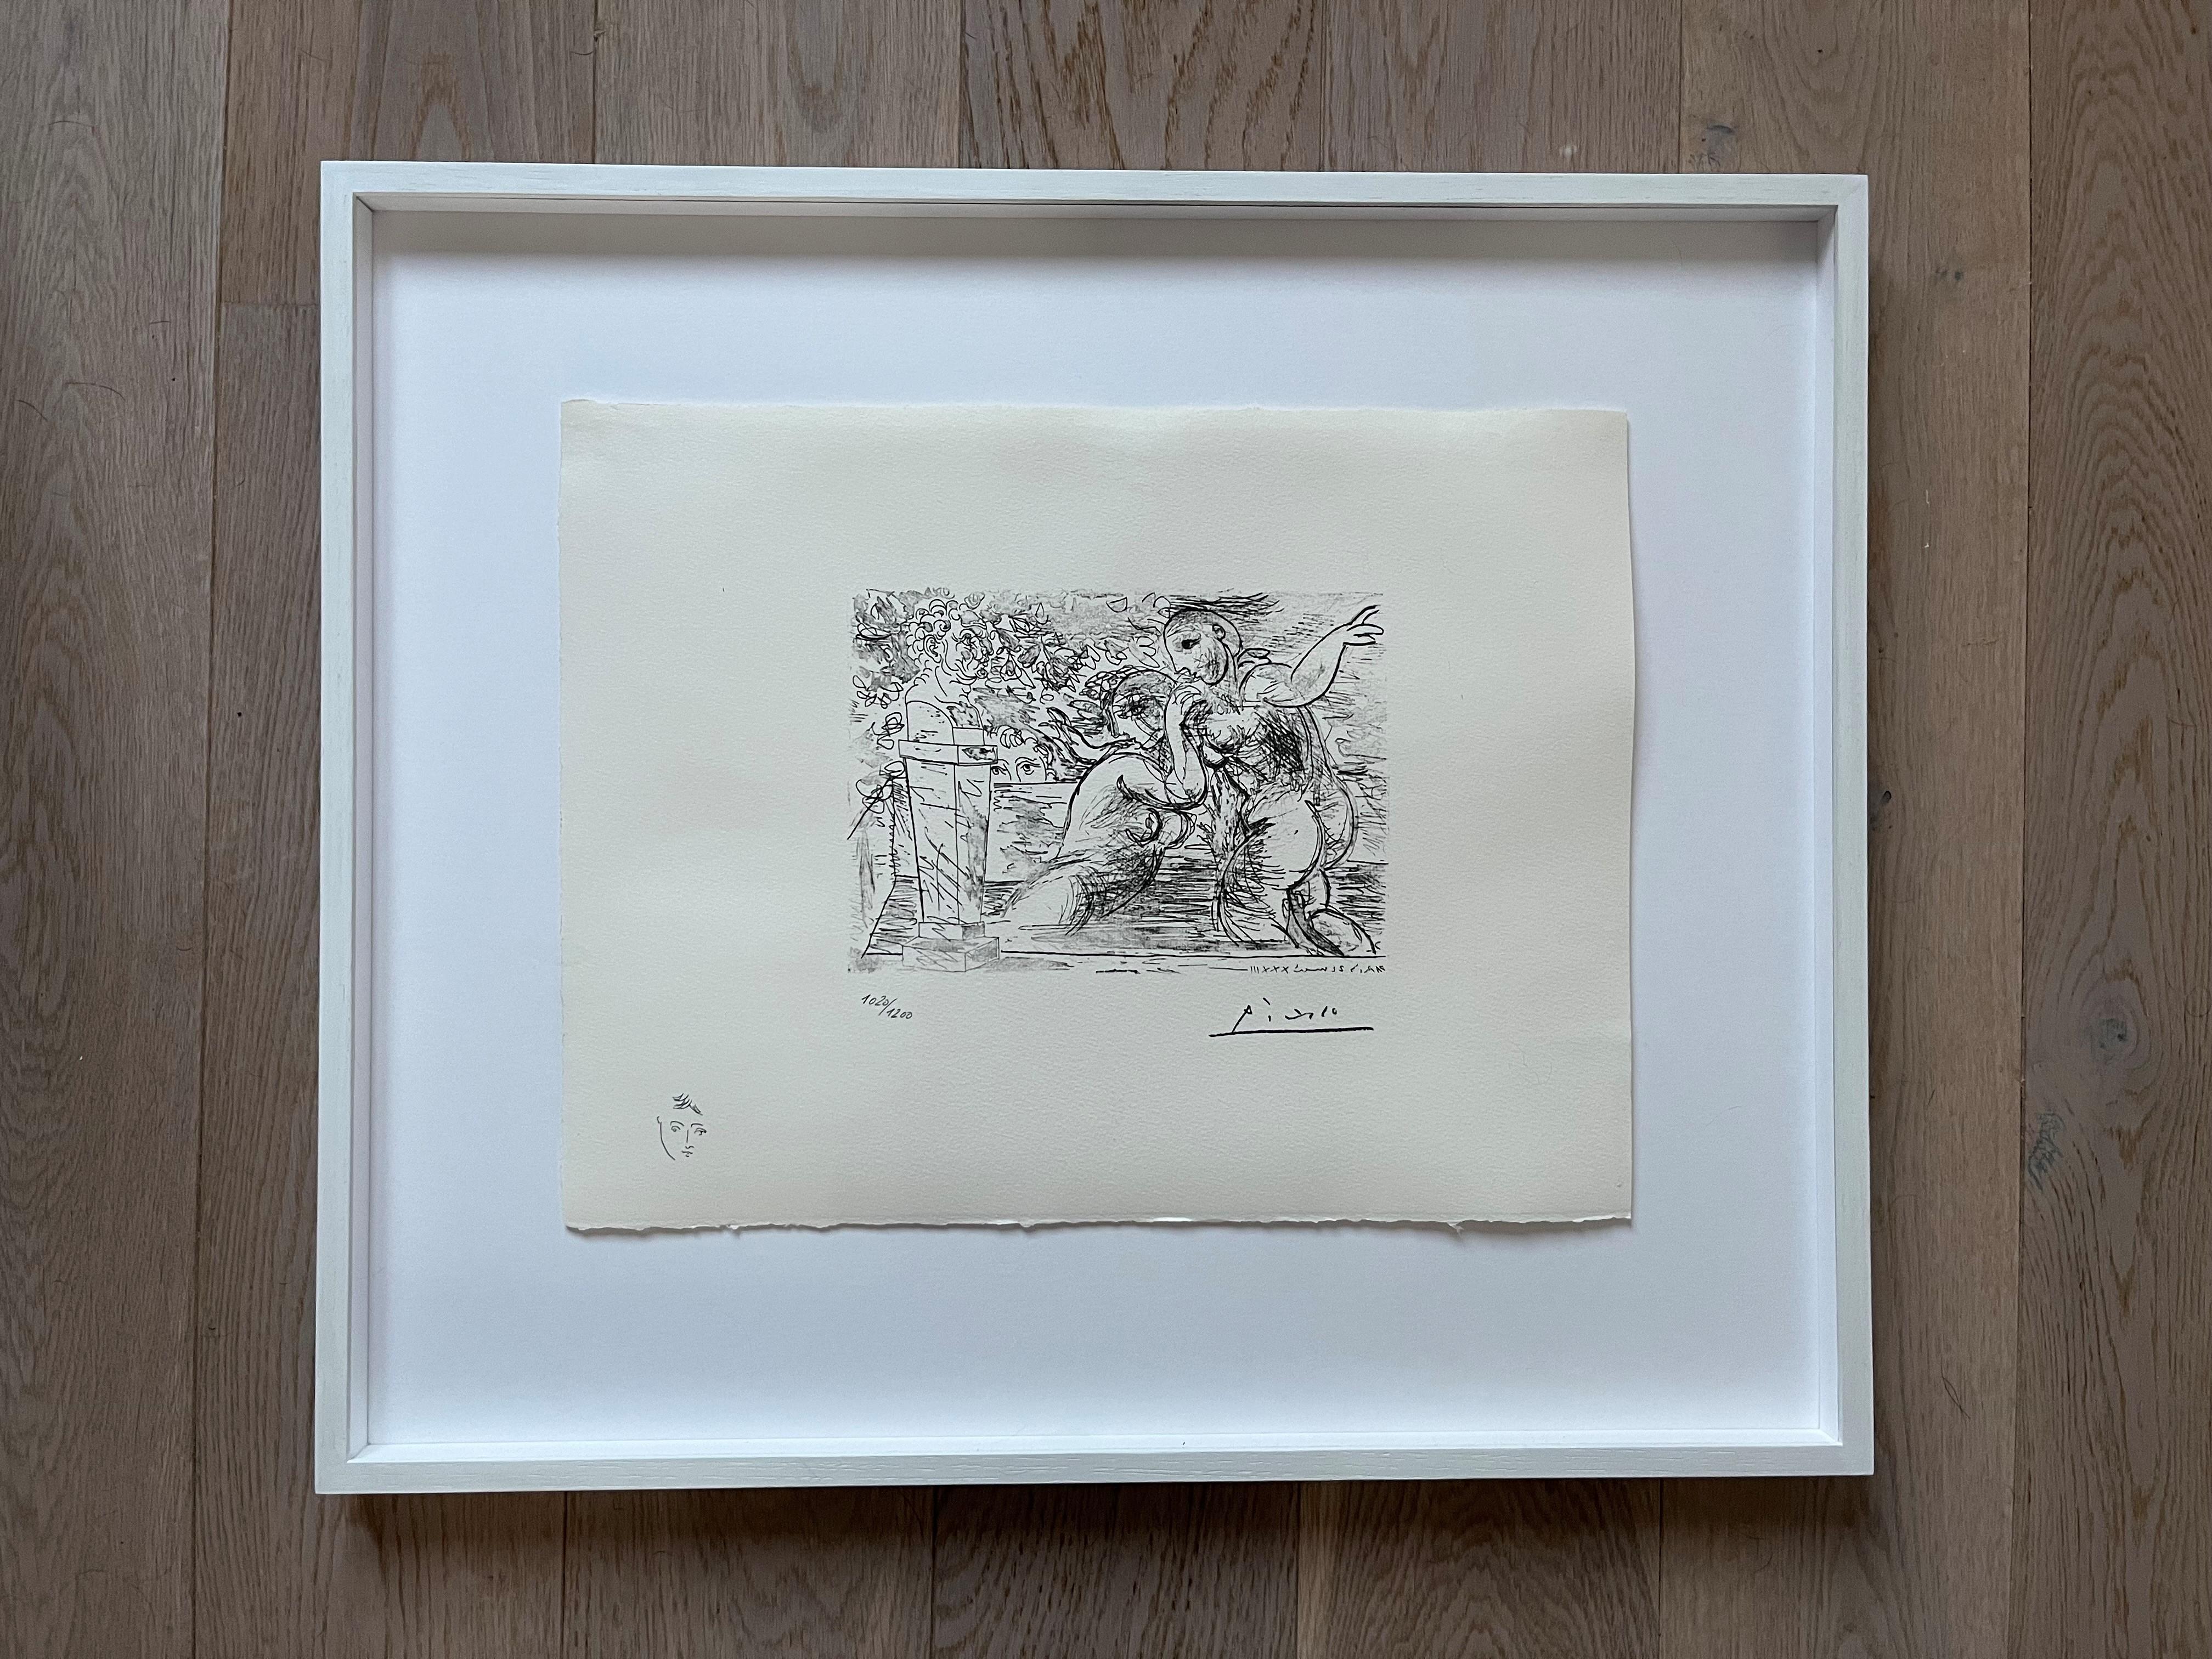 (after) Pablo Picasso Nude Print - Suite Vollard plate XIV - 1973 - Signed - Pablo Picasso (1881-1973) (after)